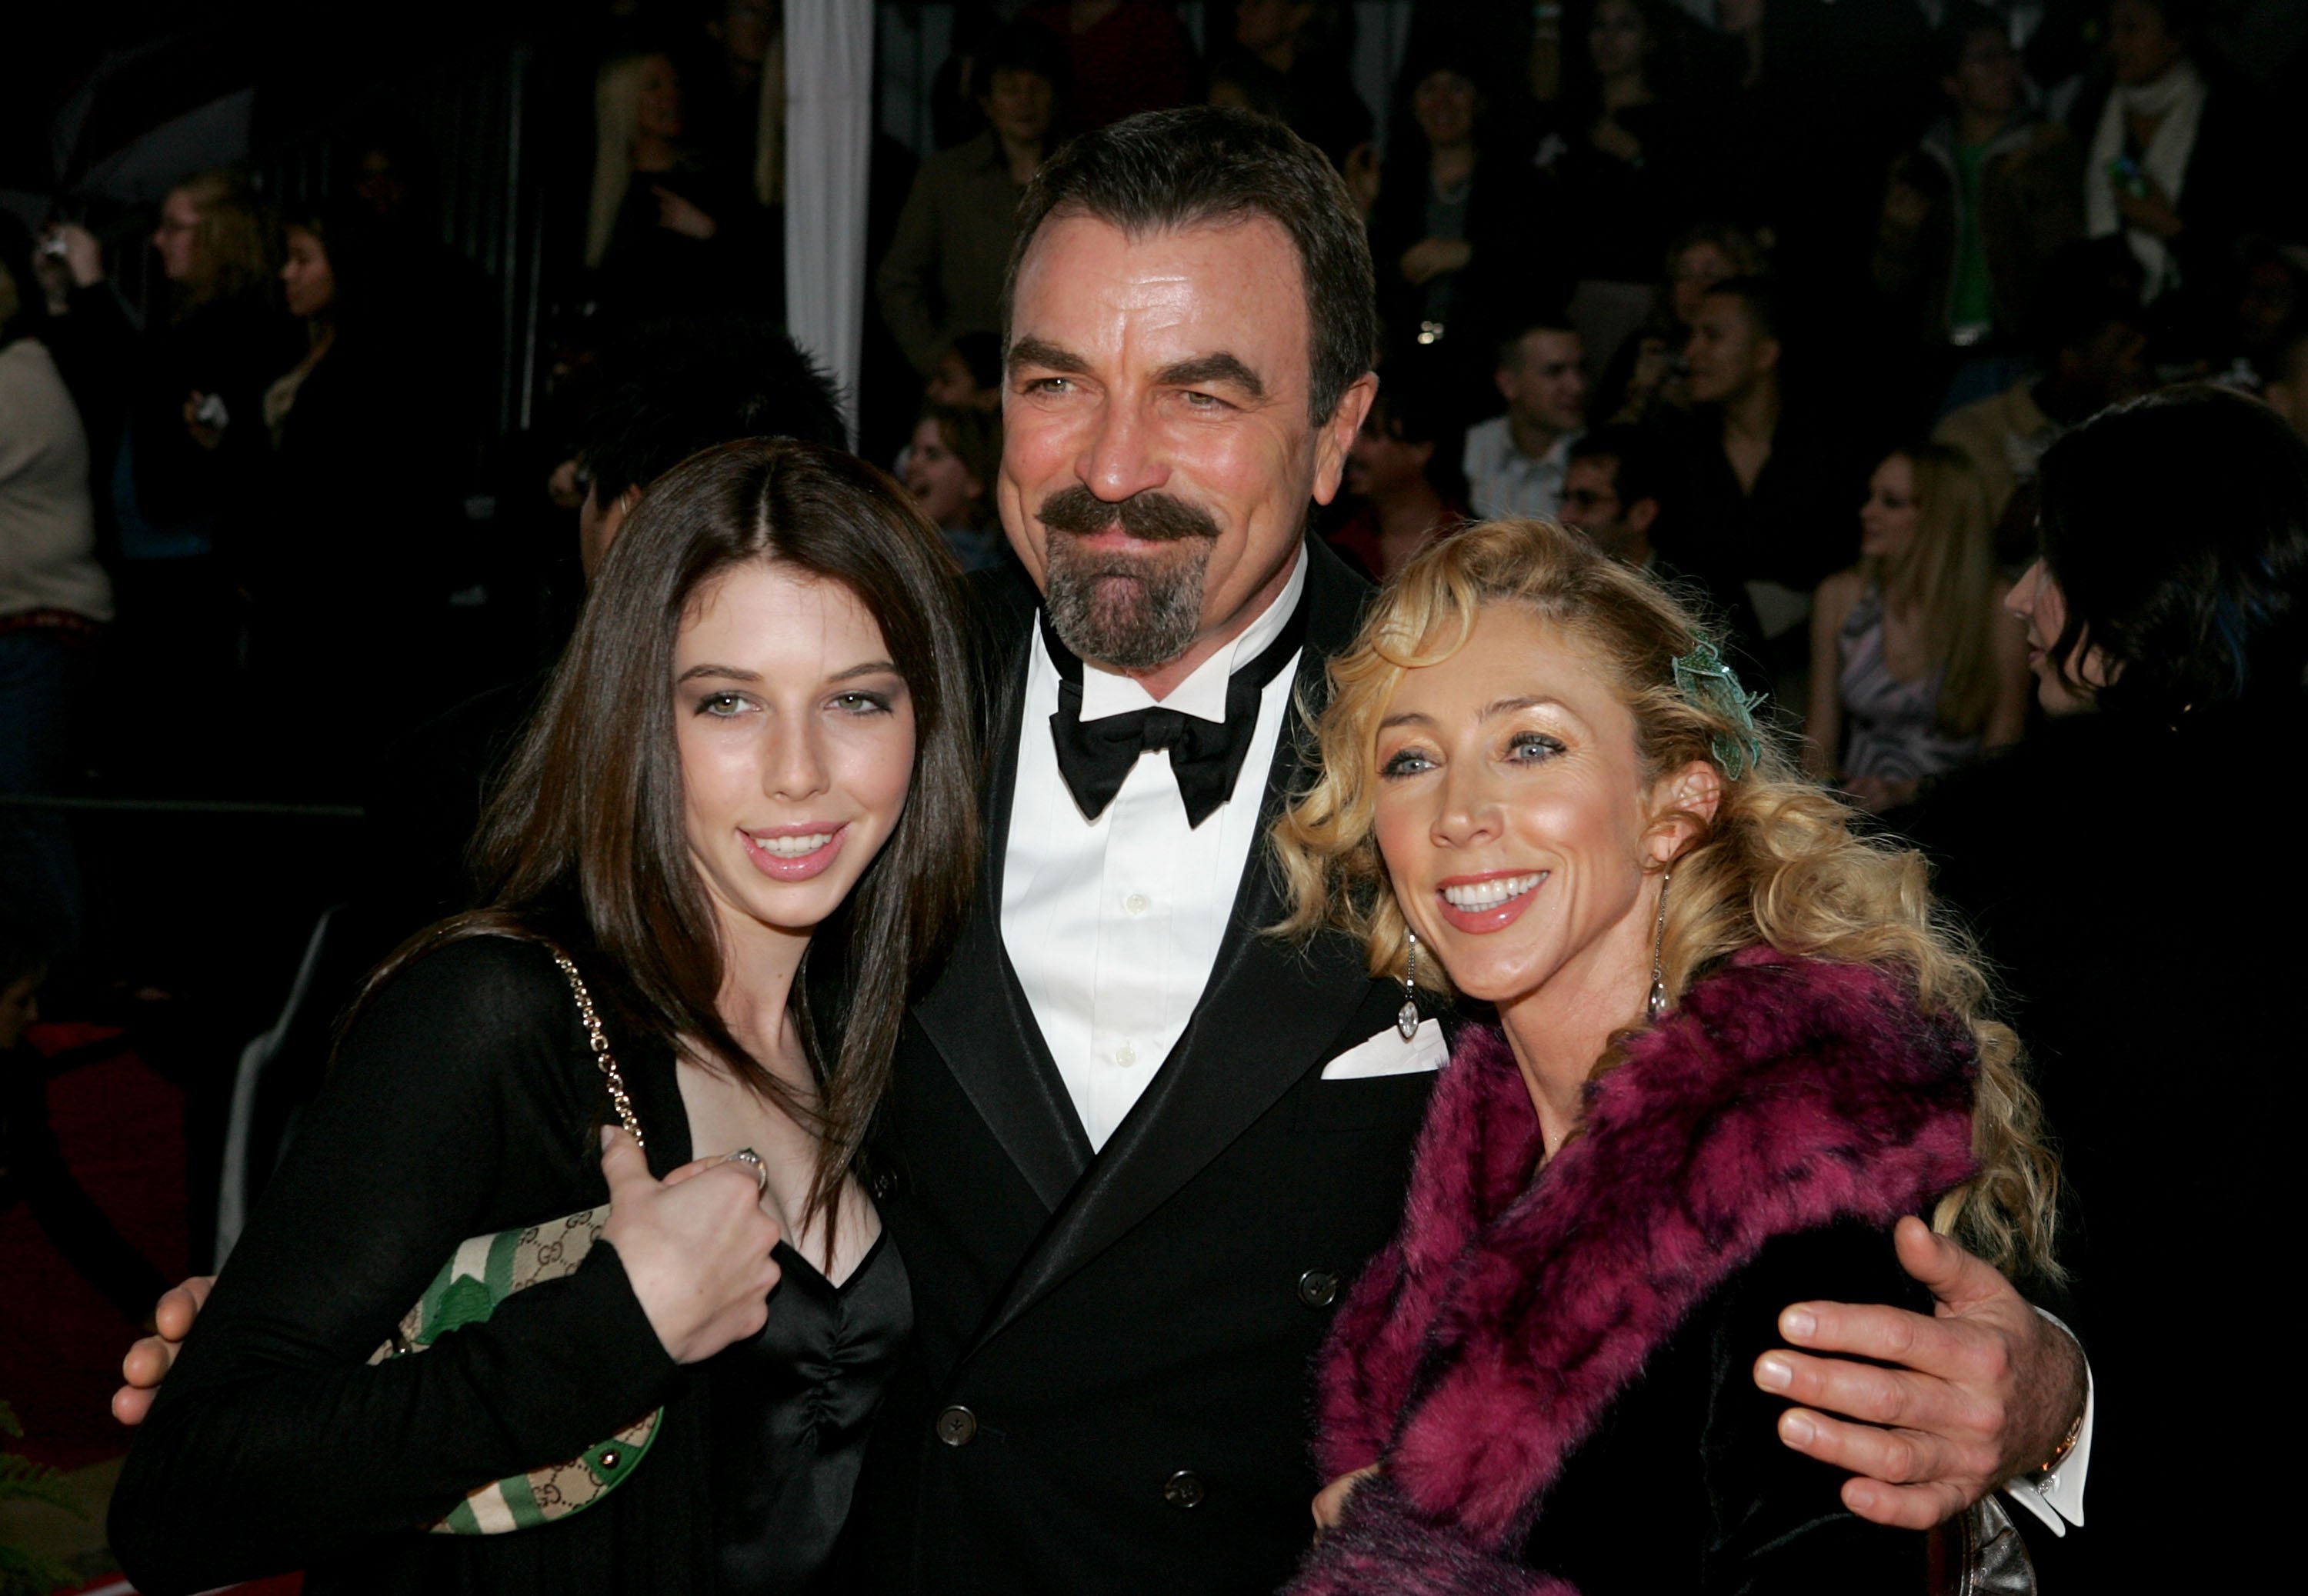 Tom Selleck with Jillie Mack and daughter Hannah arrive at the 31st Annual People's Choice Awards held at the Pasadena Civic Auditorium on January 9, 2005 in Pasadena, California |  Photo: Getty Images